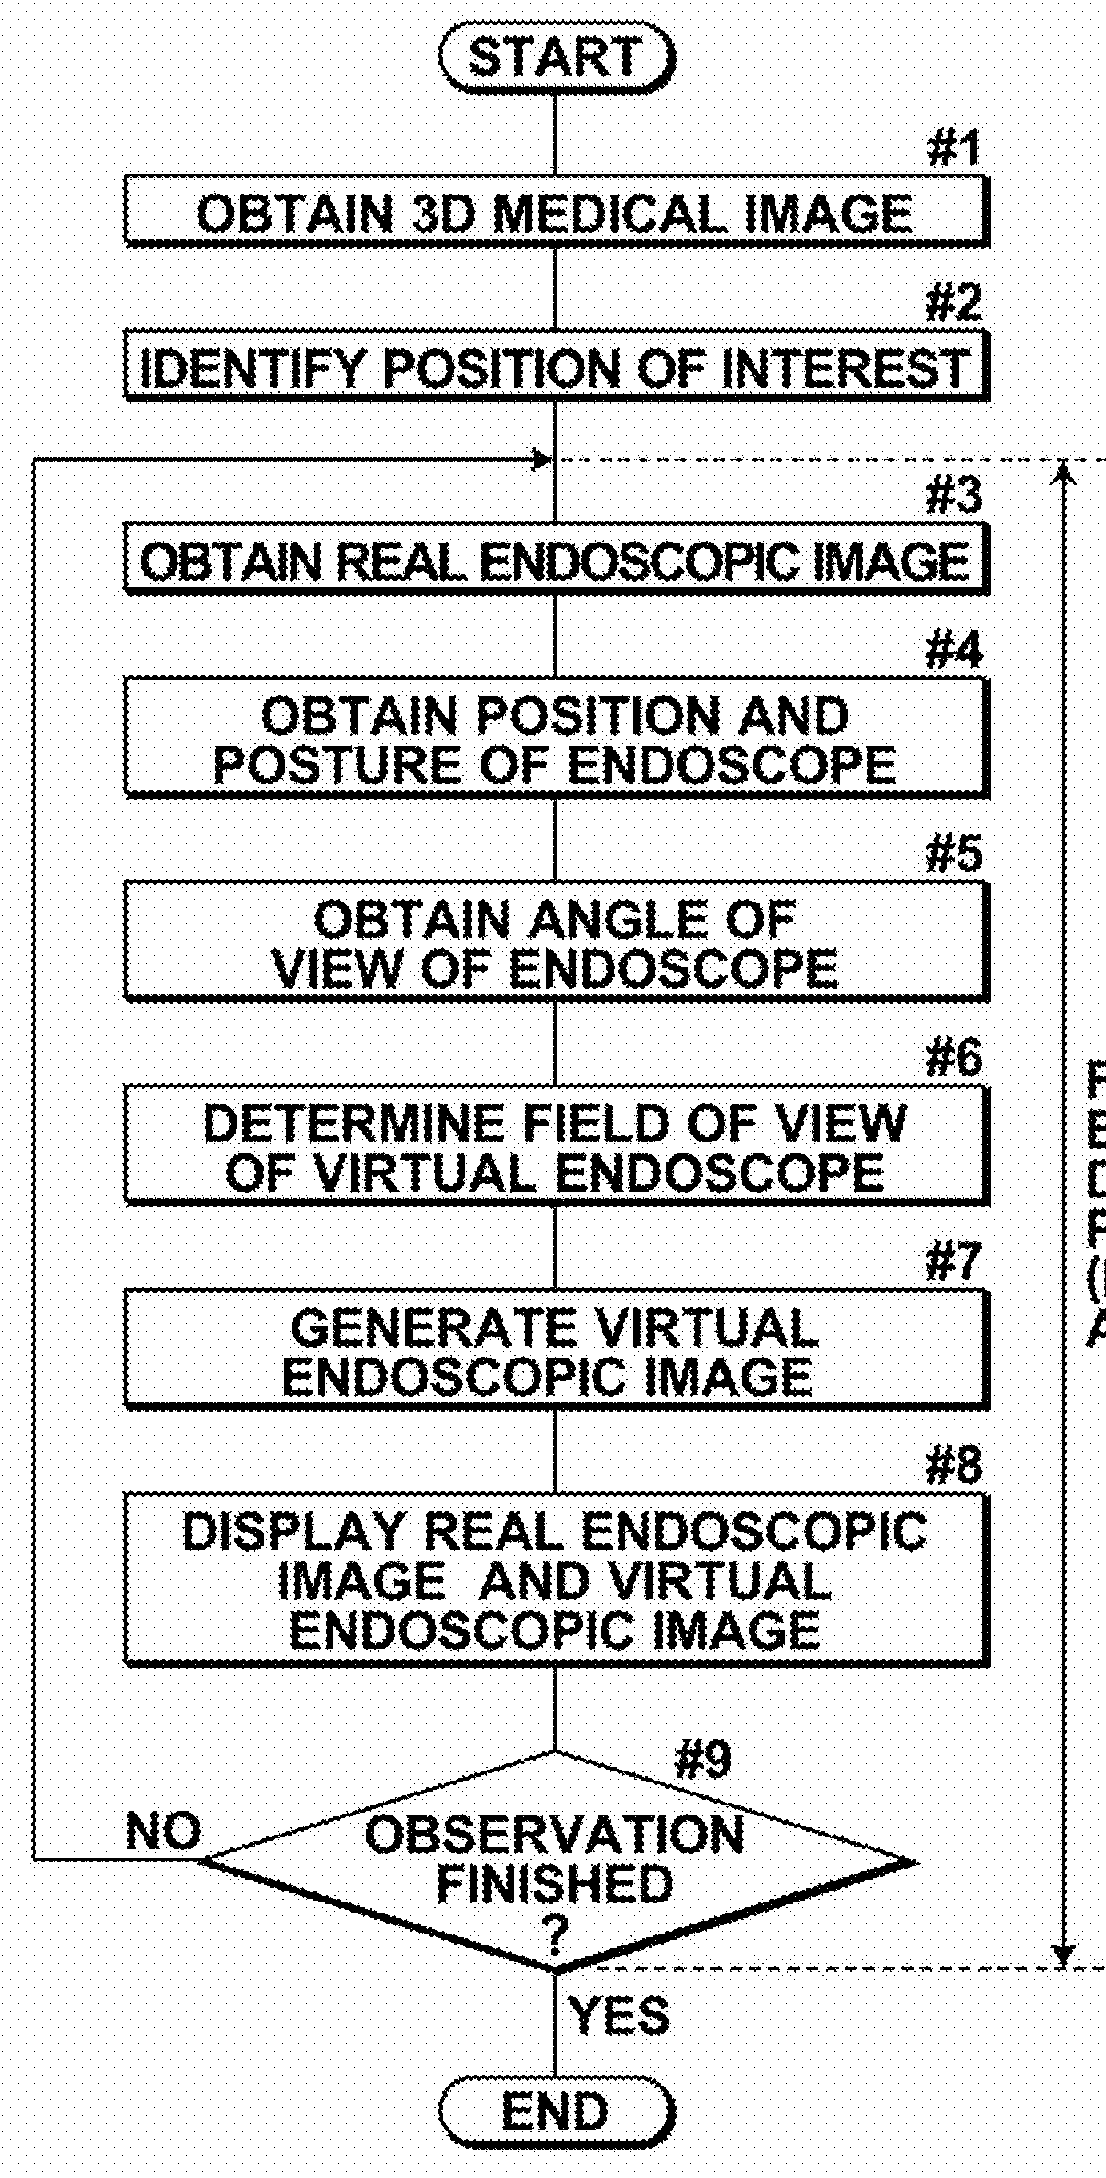 Endoscopic observation support system